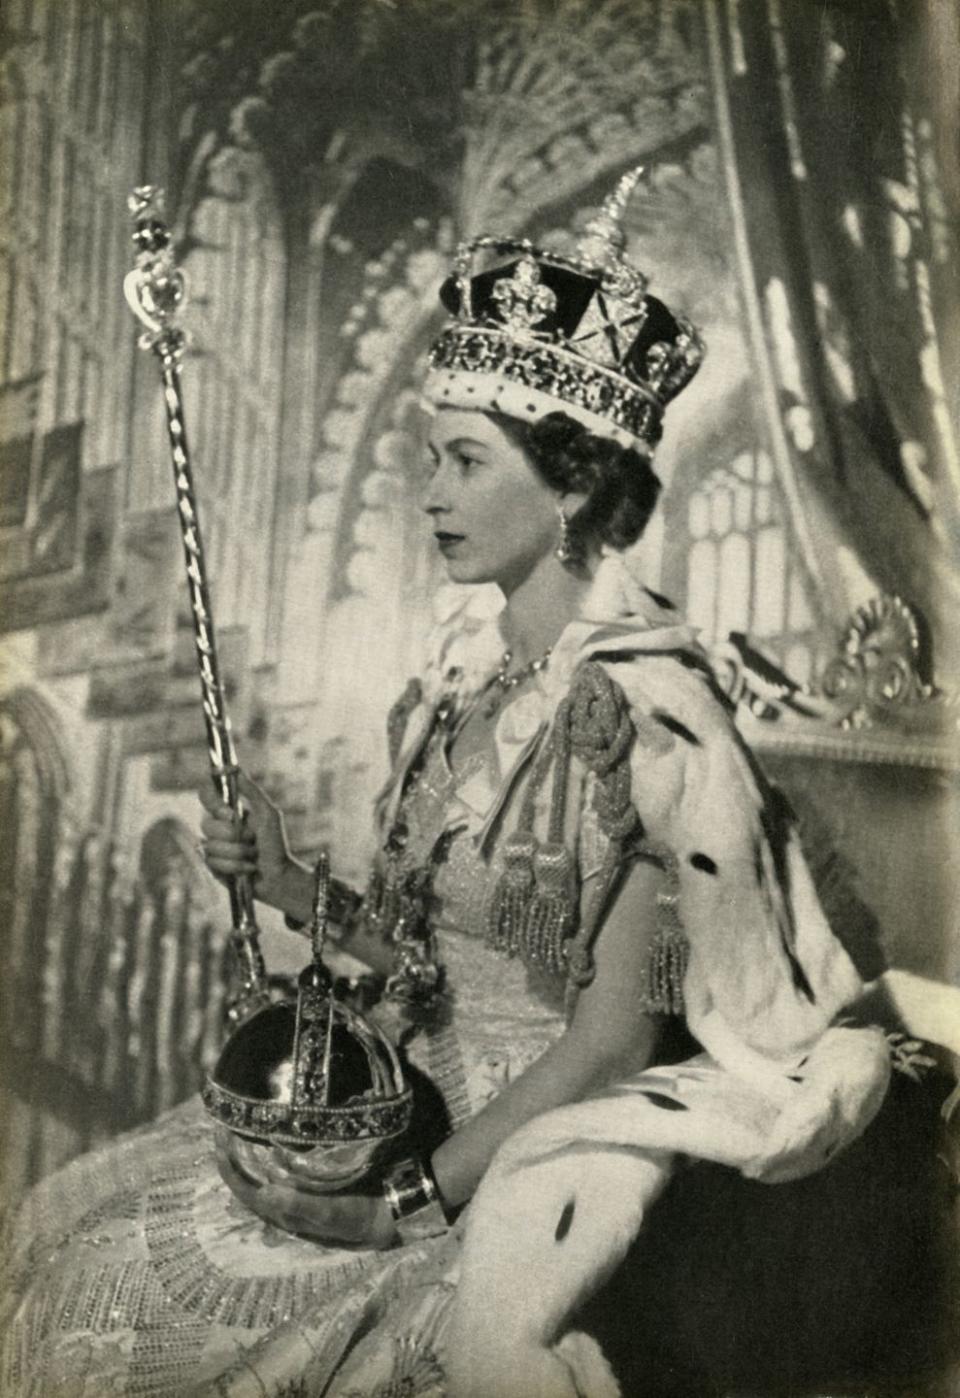 queen elizabeth ii with crown, orb and sceptre, 2 june 1953, 1962 coronation portrait the queen wears the imperial state crown, made in 1937 for the coronation of her father george vi, and holds the sovereigns sceptre with cross, and the sovereigns orb, both dating from 1661 the crown, orb and sceptre are part of the royal collection at the tower of london from the crown jewels in the tower of london, by martin holmes, fsa her majestys stationery, london, 1962 creator unknown photo by the print collectorheritage images via getty images